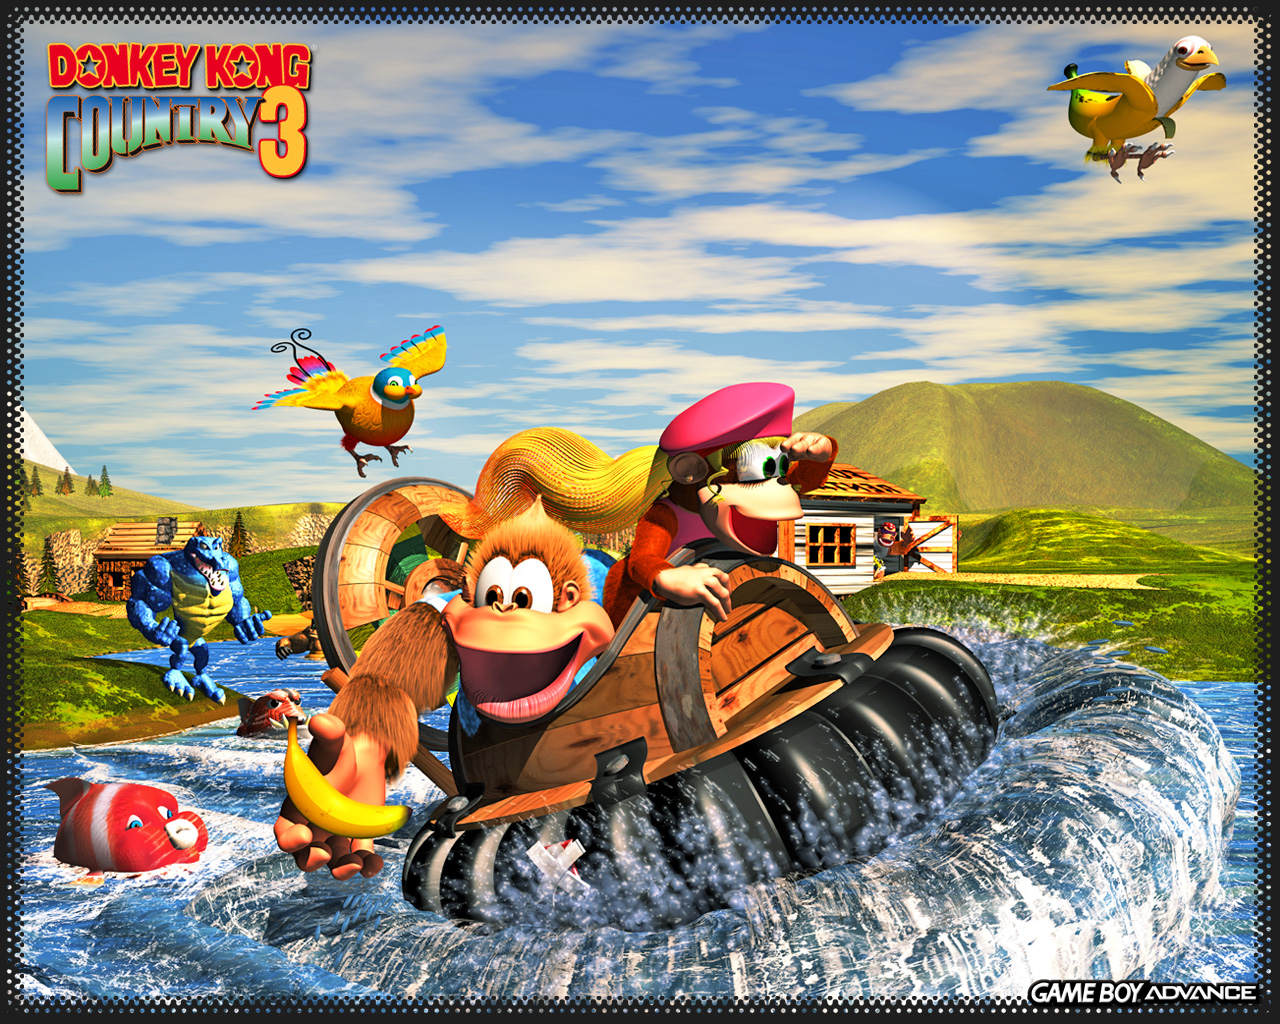 Donkey kong country download mac torrent